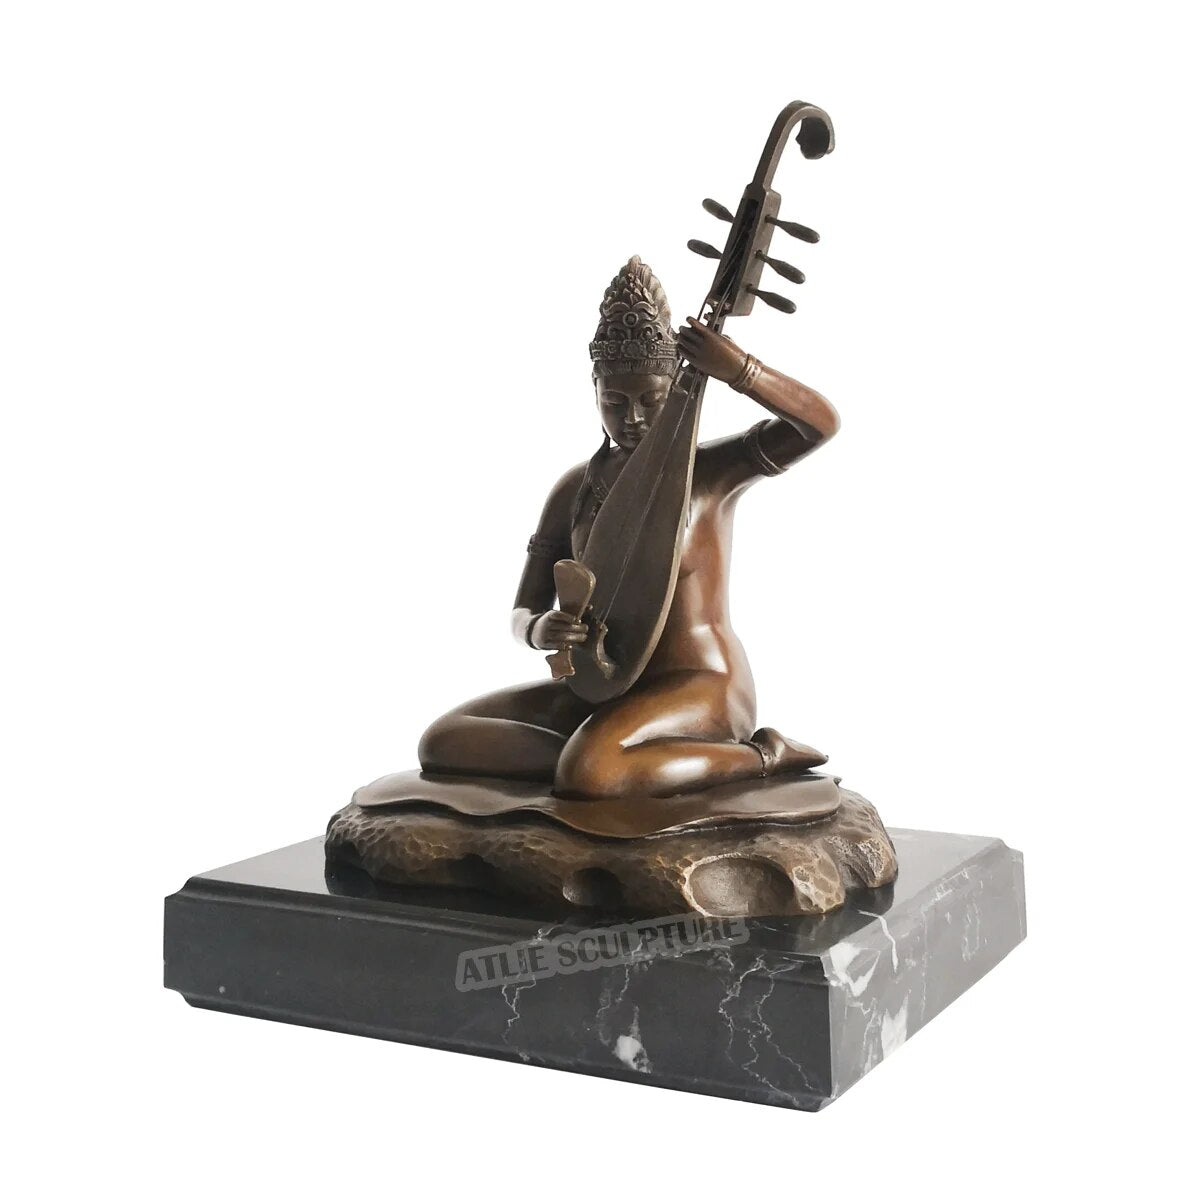 Exquisite 8.5-inch Bronze Goddess Saraswati Sculpture on Marble Base: A Harmonious Blend of Artistry and Divinity